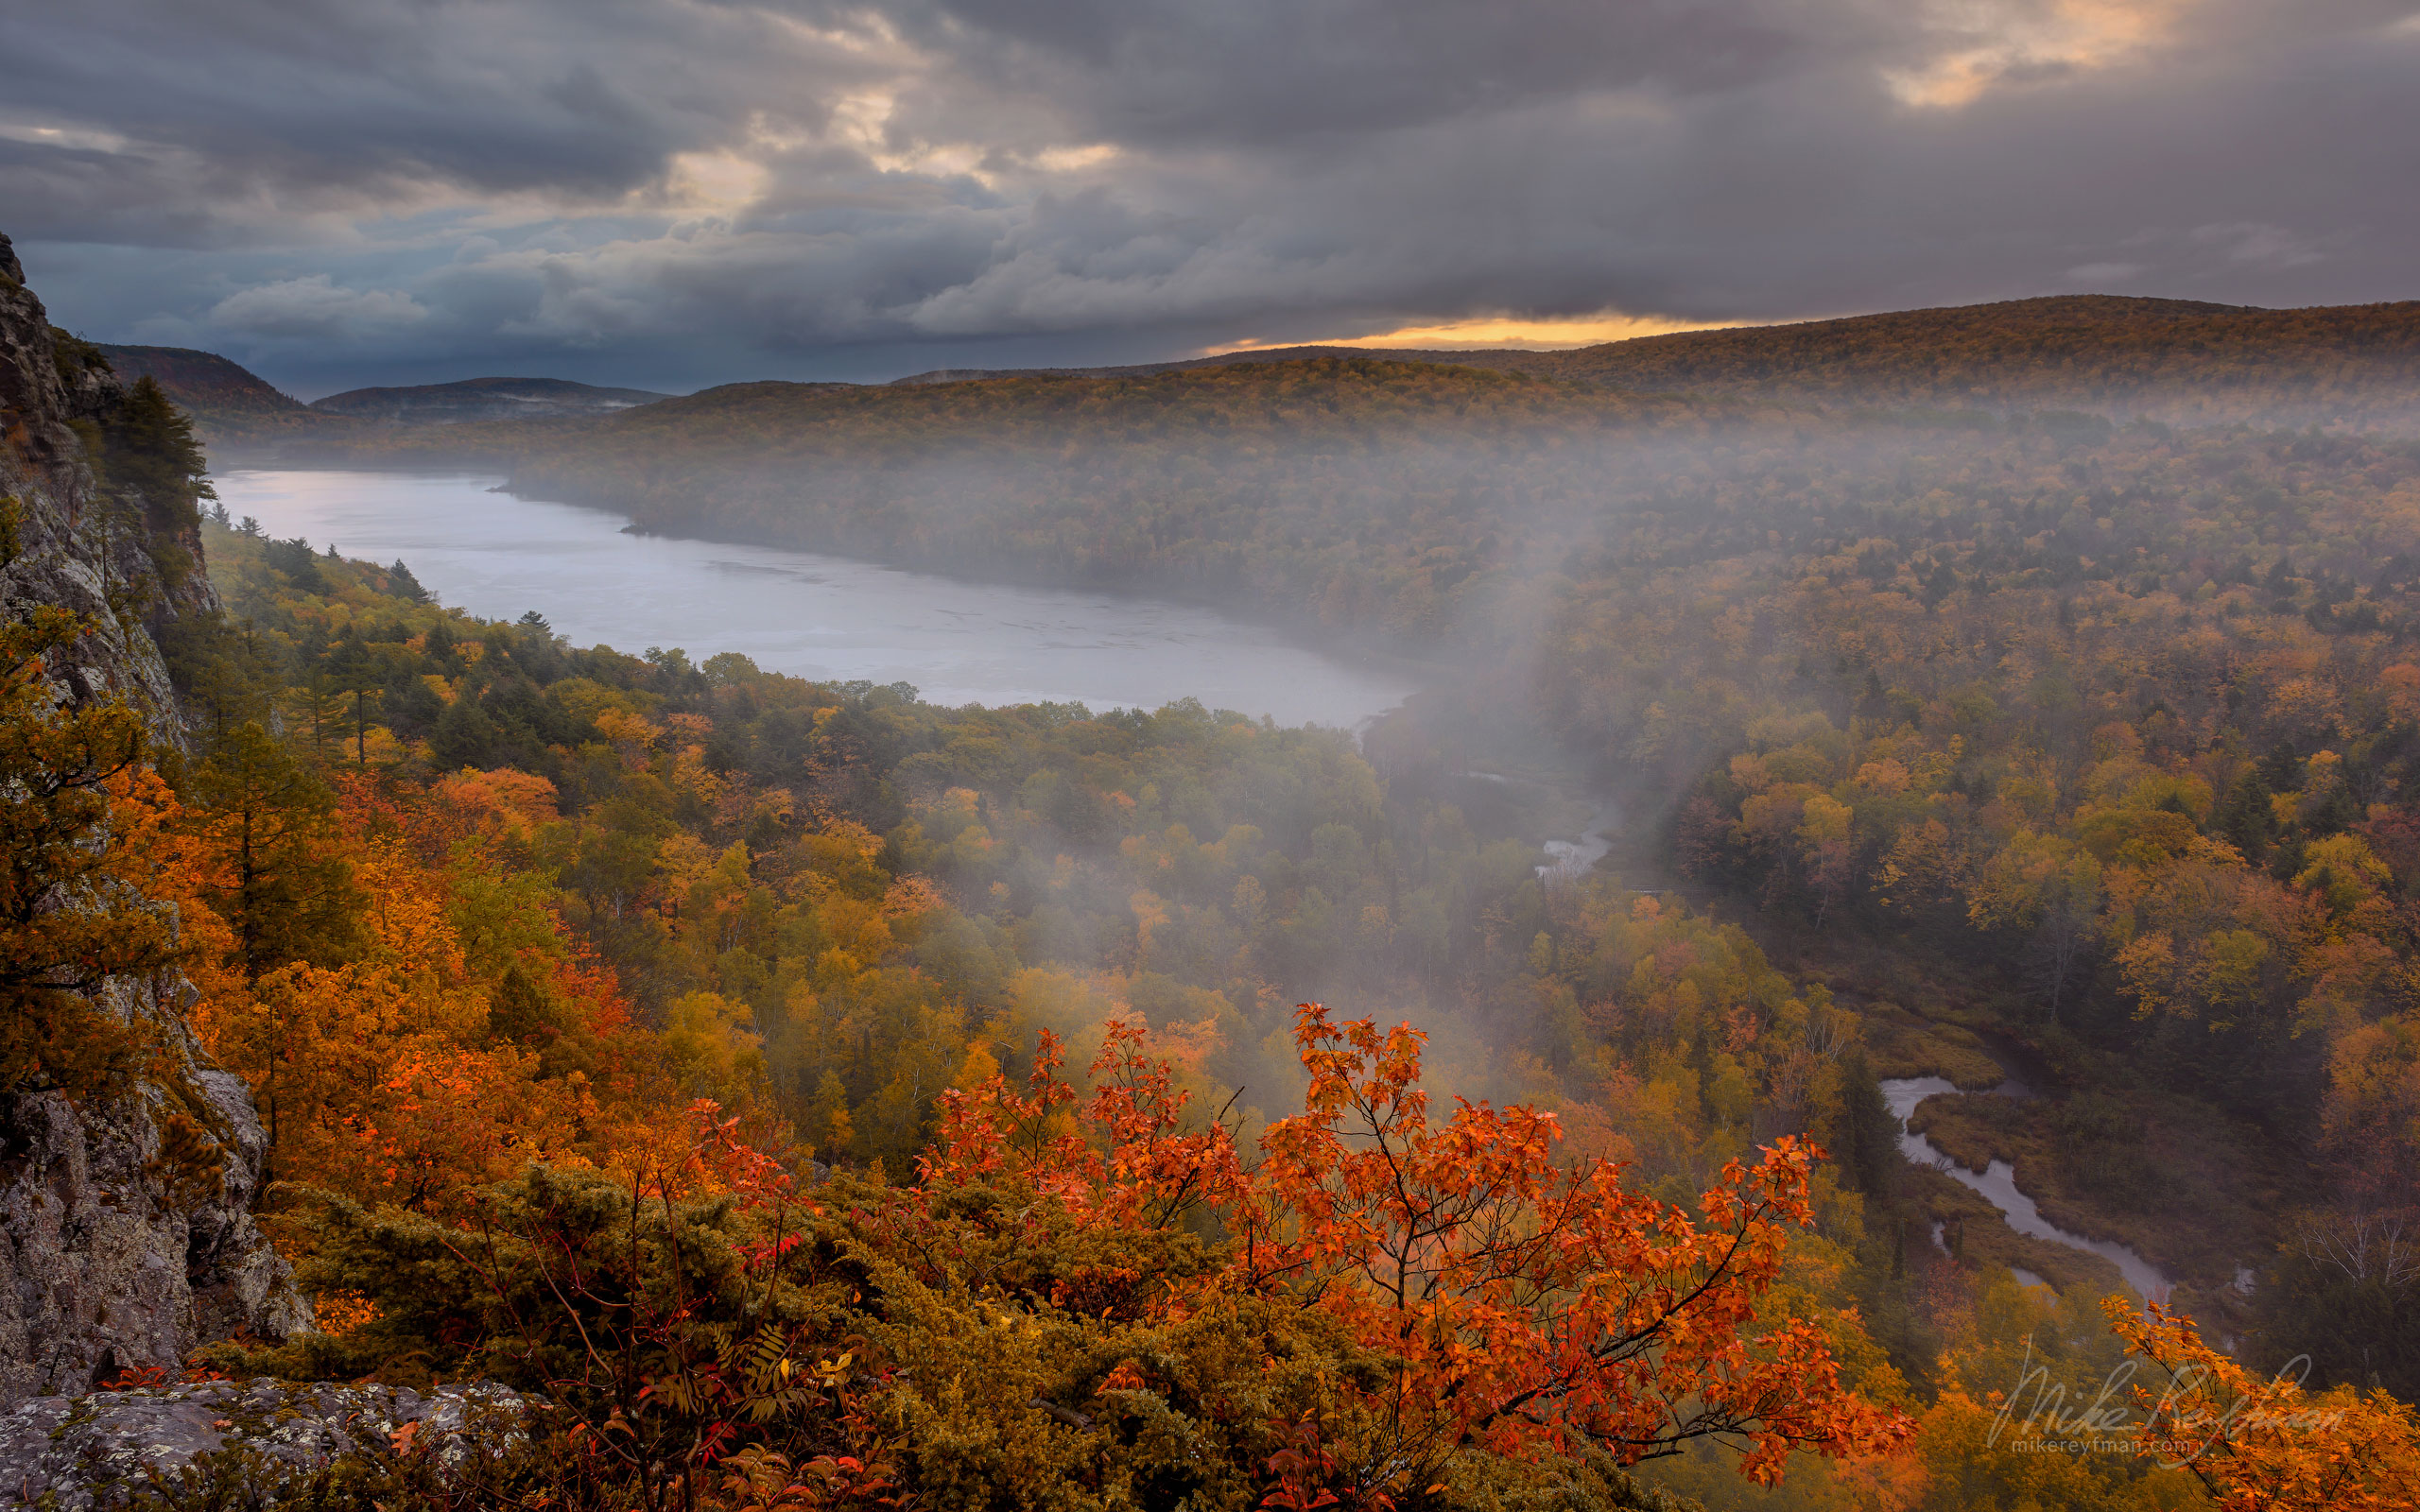 Lake of the Clouds & Little Carp River. Porcupine Mountains Wilderness State Park, Upper Peninsula, Michigan, USA UP-MI_087_ZRA7035.jpg - Michigan's Upper Peninsula - the best destination in US for fall colors. - Mike Reyfman Photography